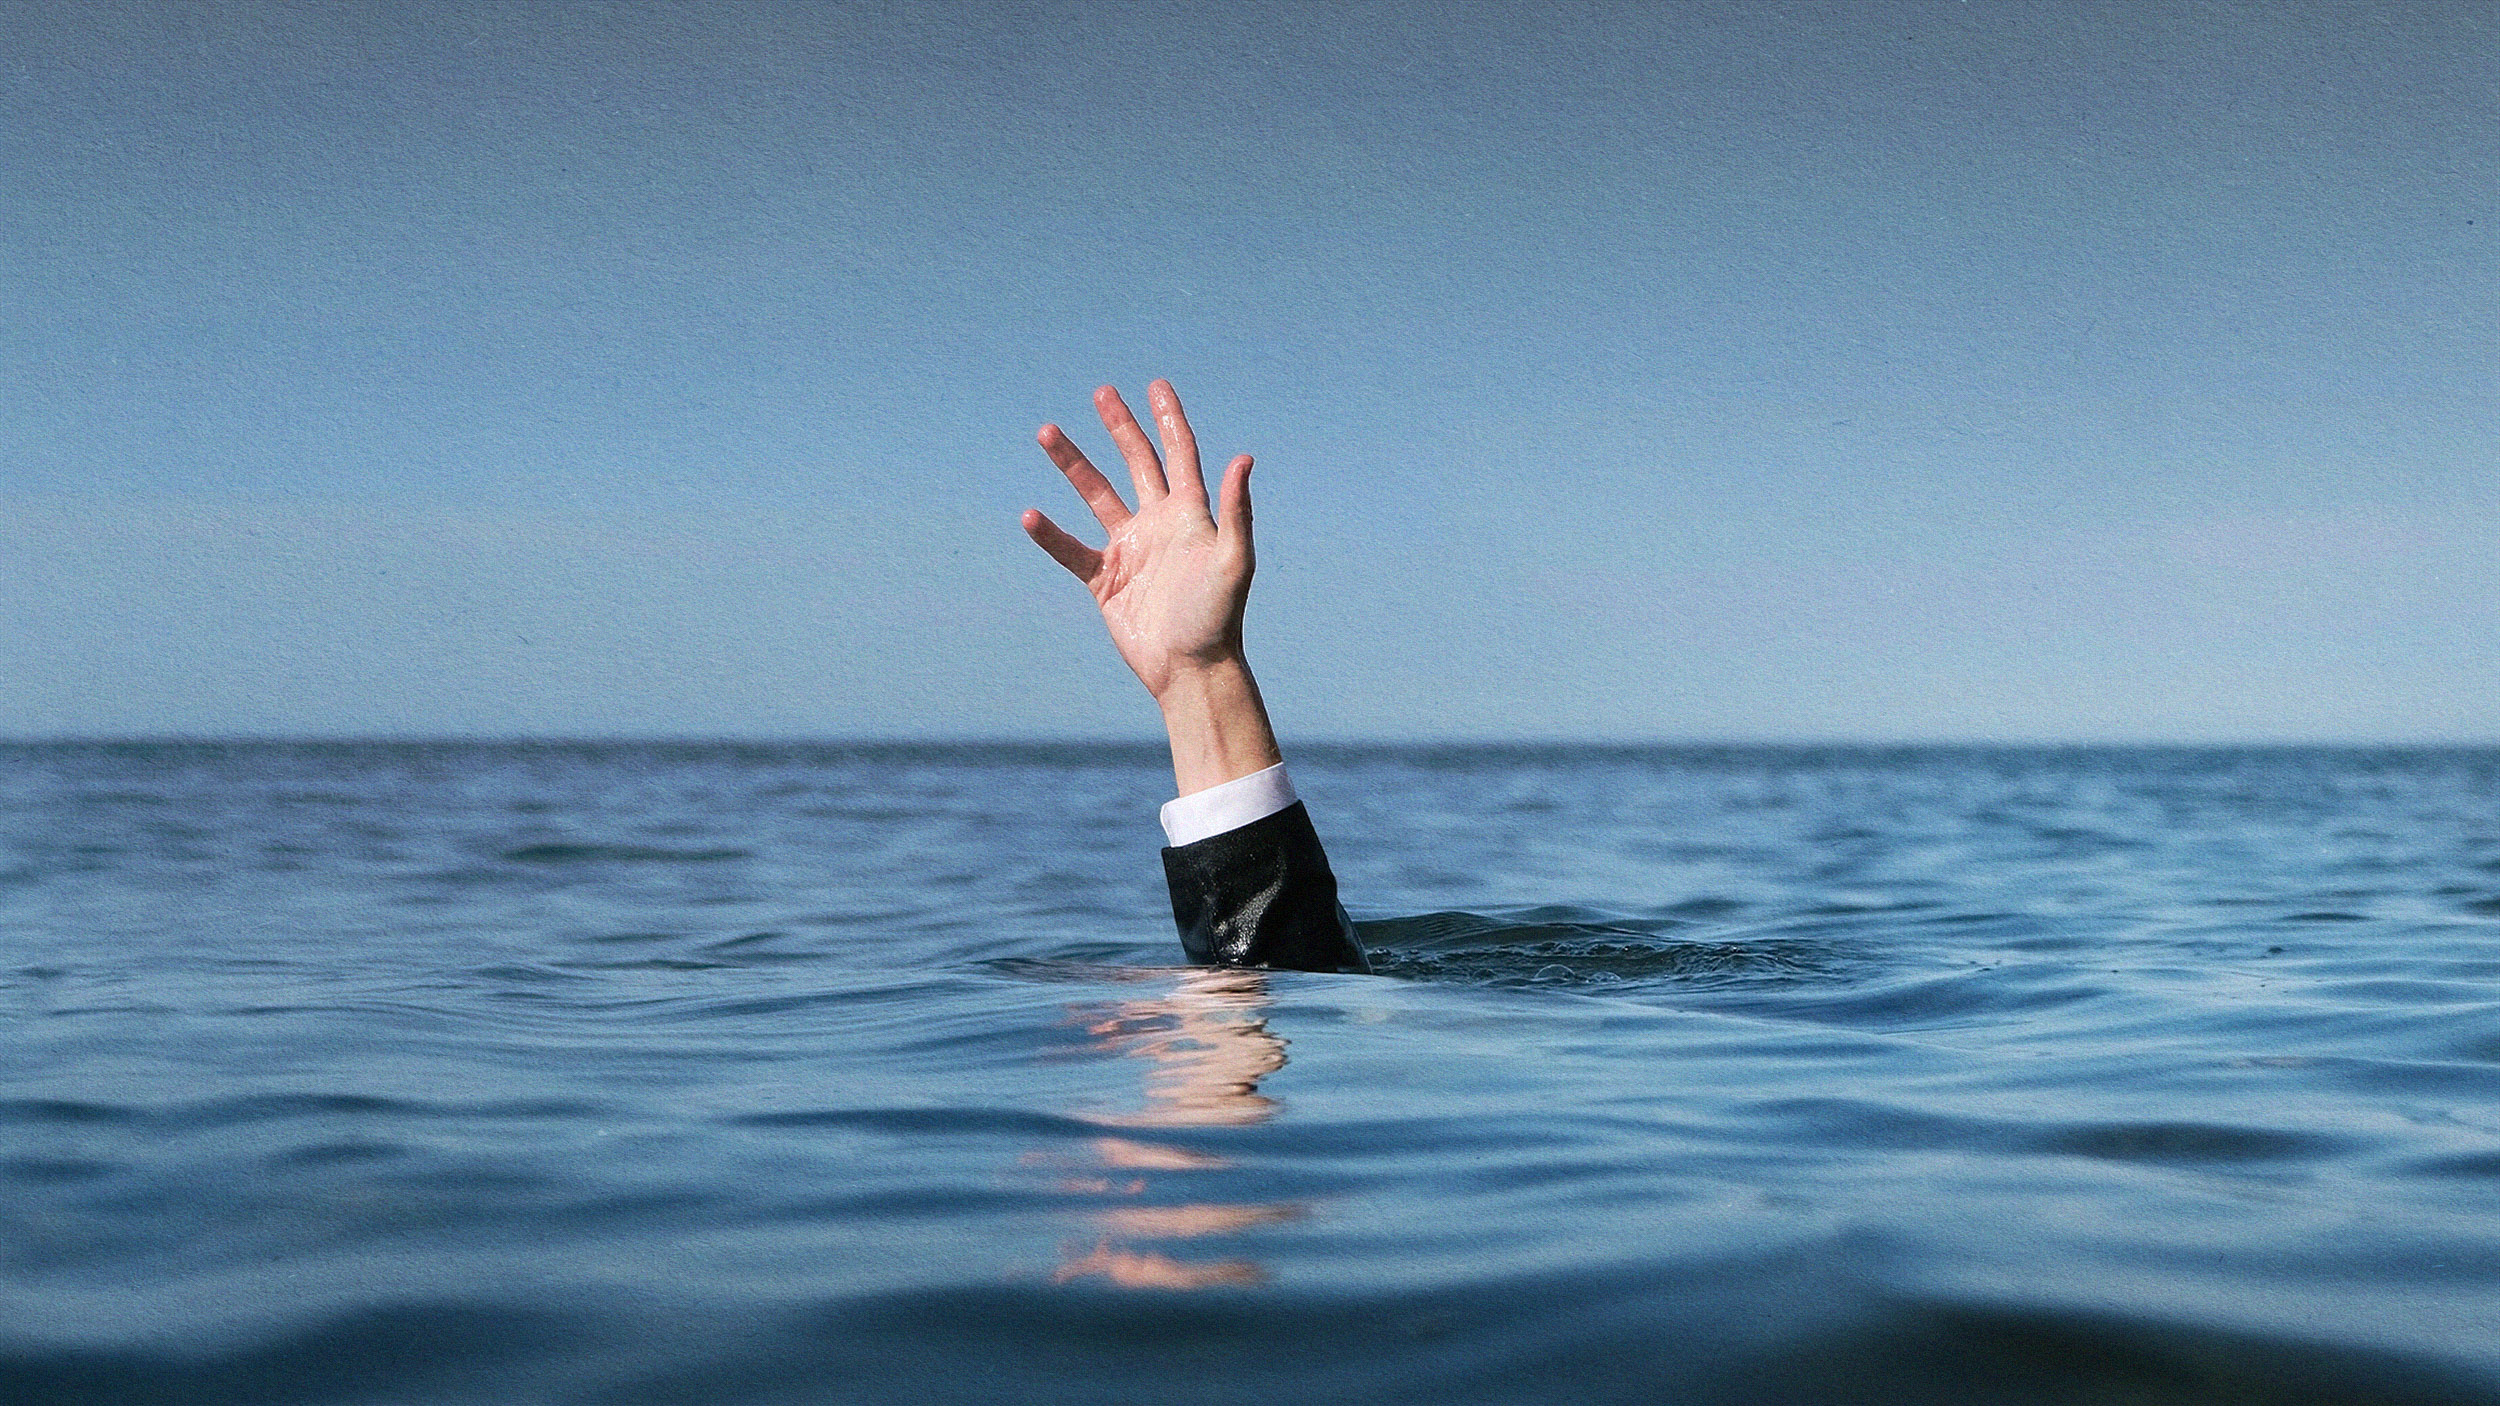 A middle manager's hand emerging from the water.